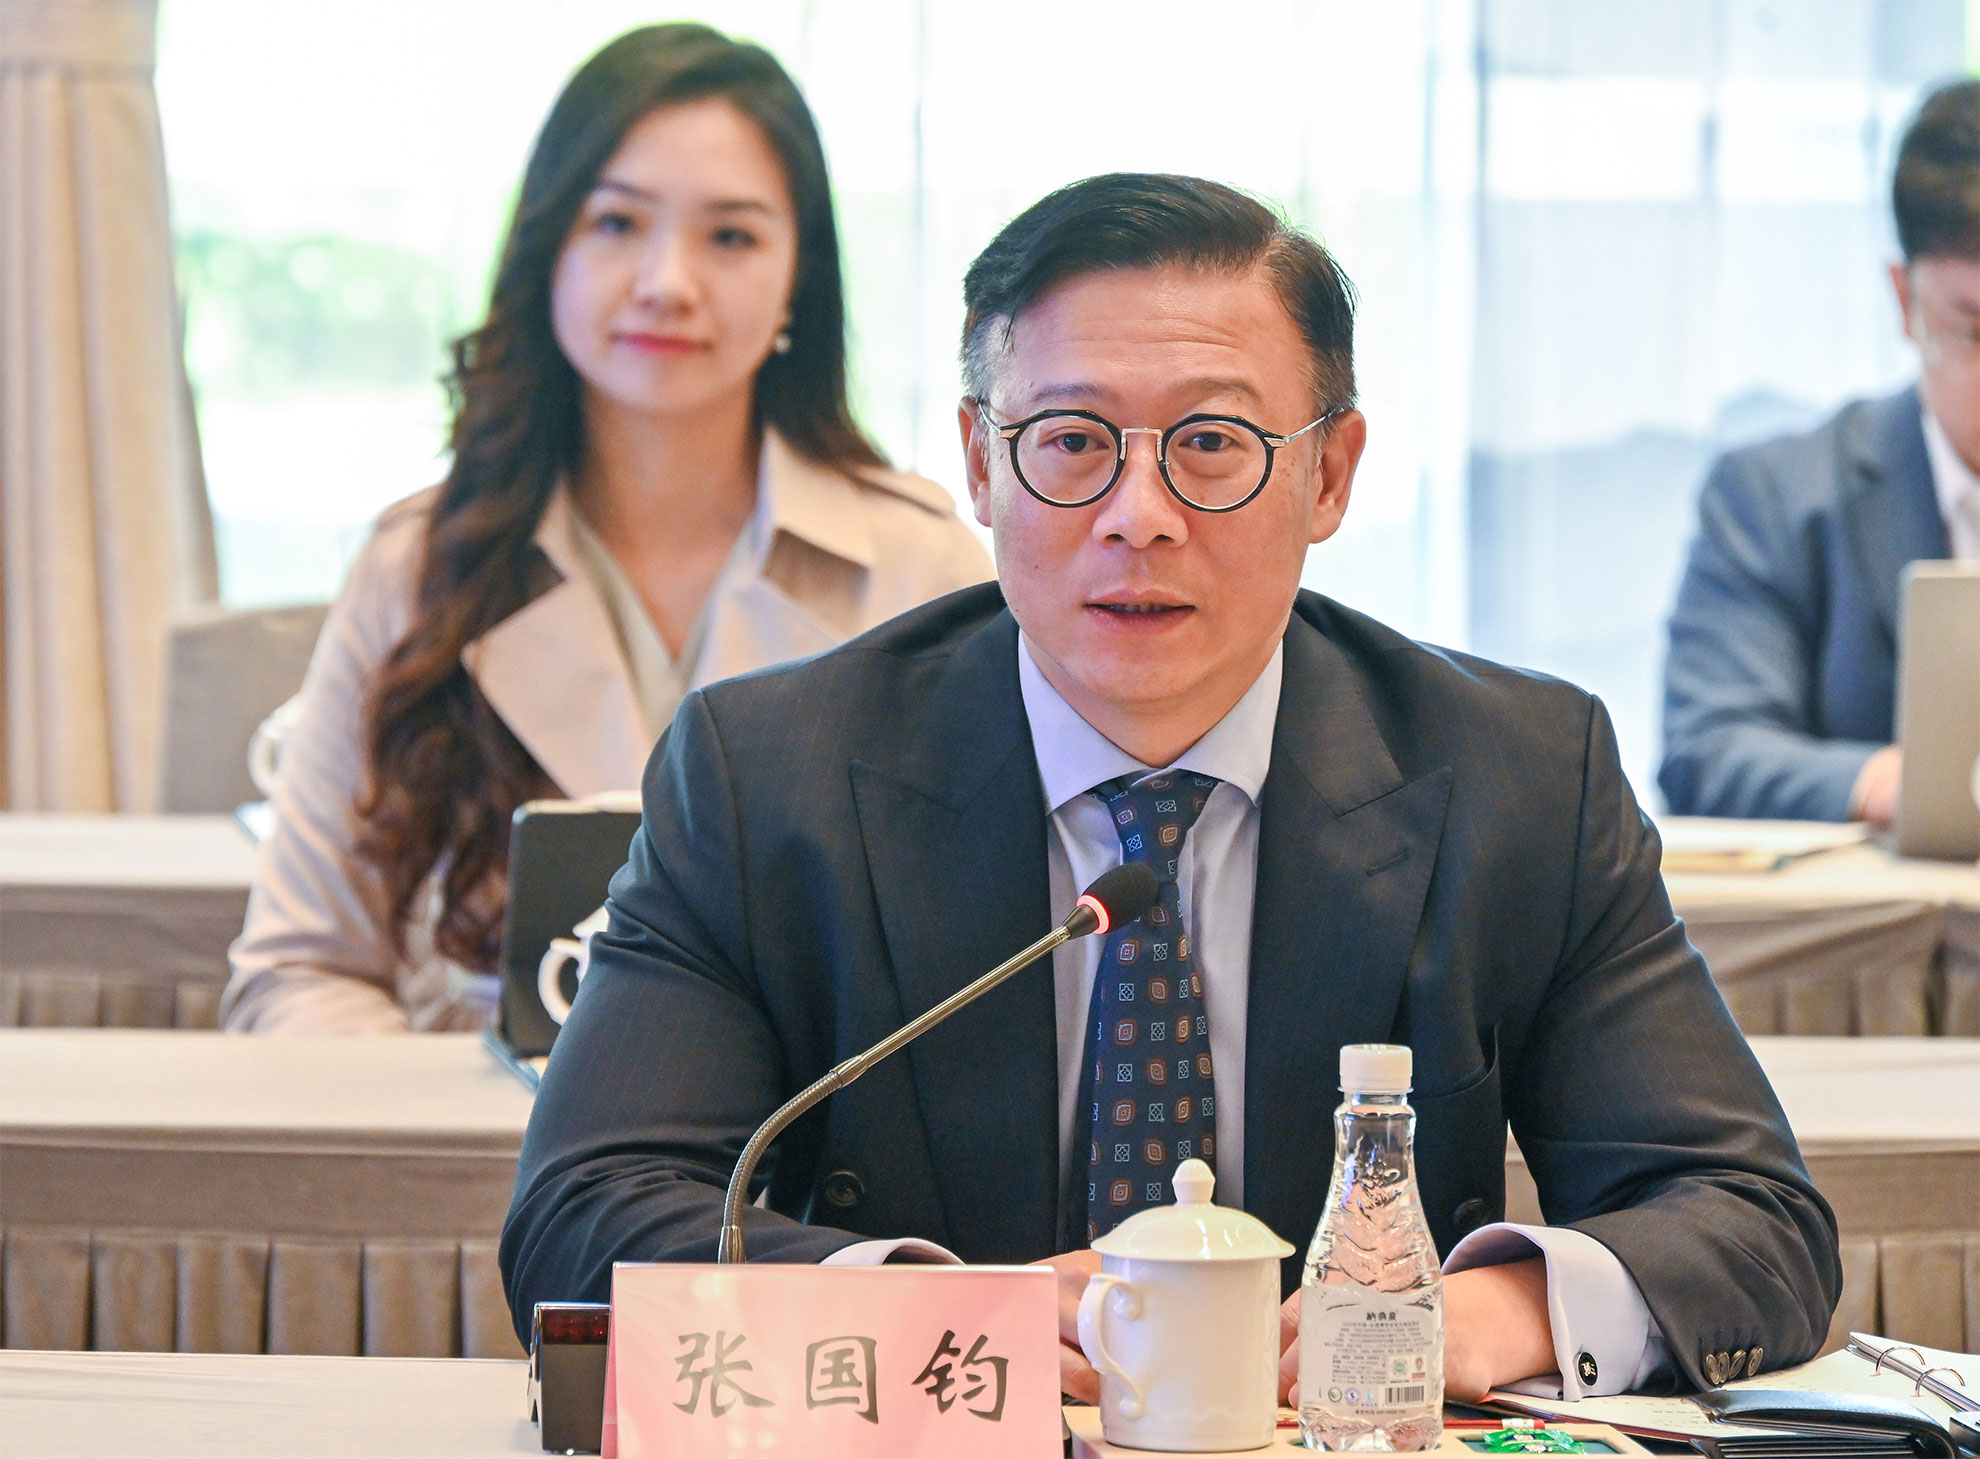 The Deputy Secretary for Justice, Mr Cheung Kwok-kwan, and a delegation of young lawyers led by him today (November 17) finished the first stop, Shenzhen, of their visit to Mainland cities of the Greater Bay Area. Photo shows Mr Cheung speaking at the discussion session held during the visit to the Justice Bureau of Shenzhen Municipality.